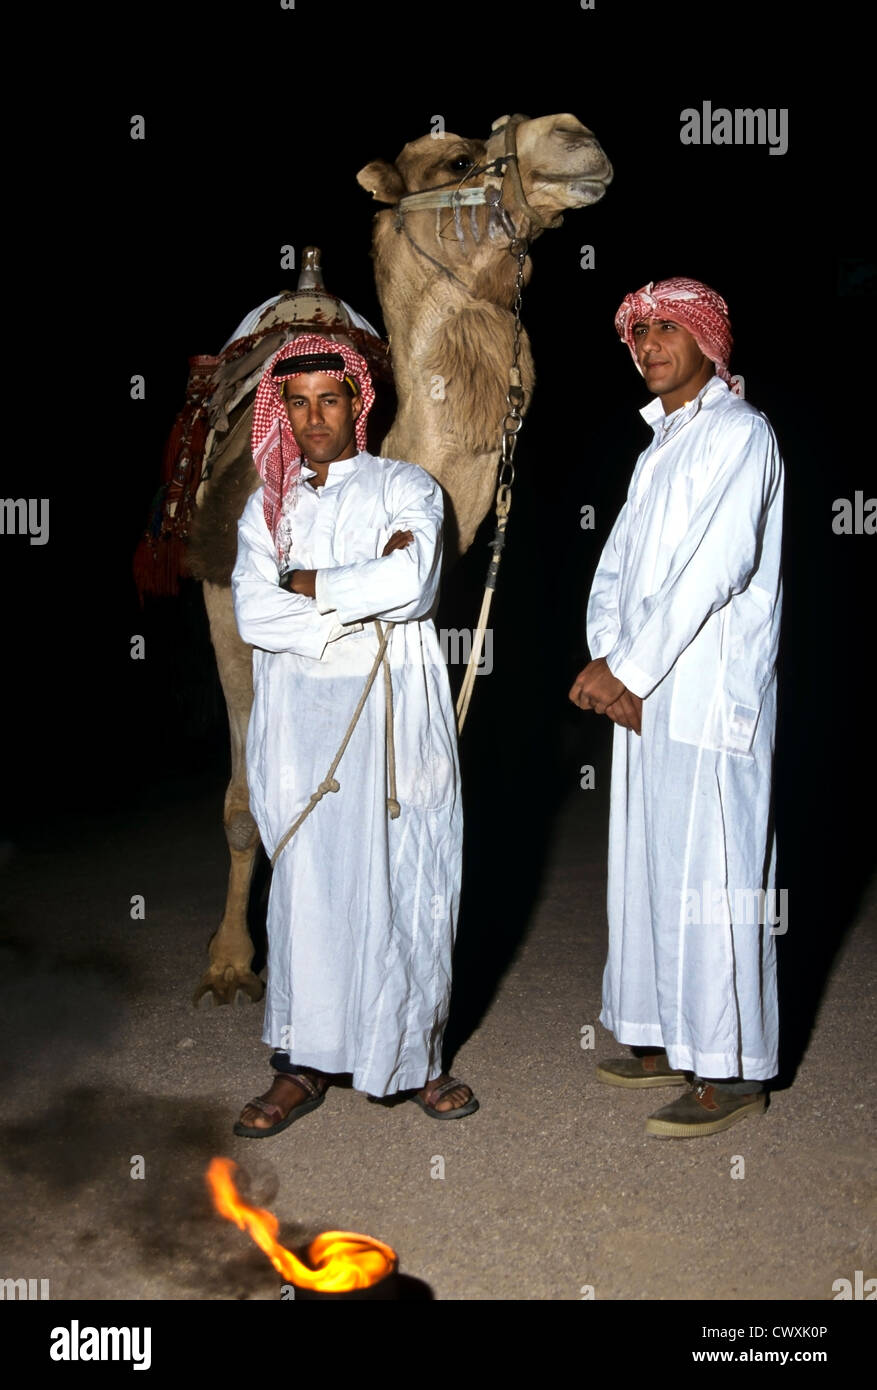 8051. Bedouins with a camel, Israel Stock Photo